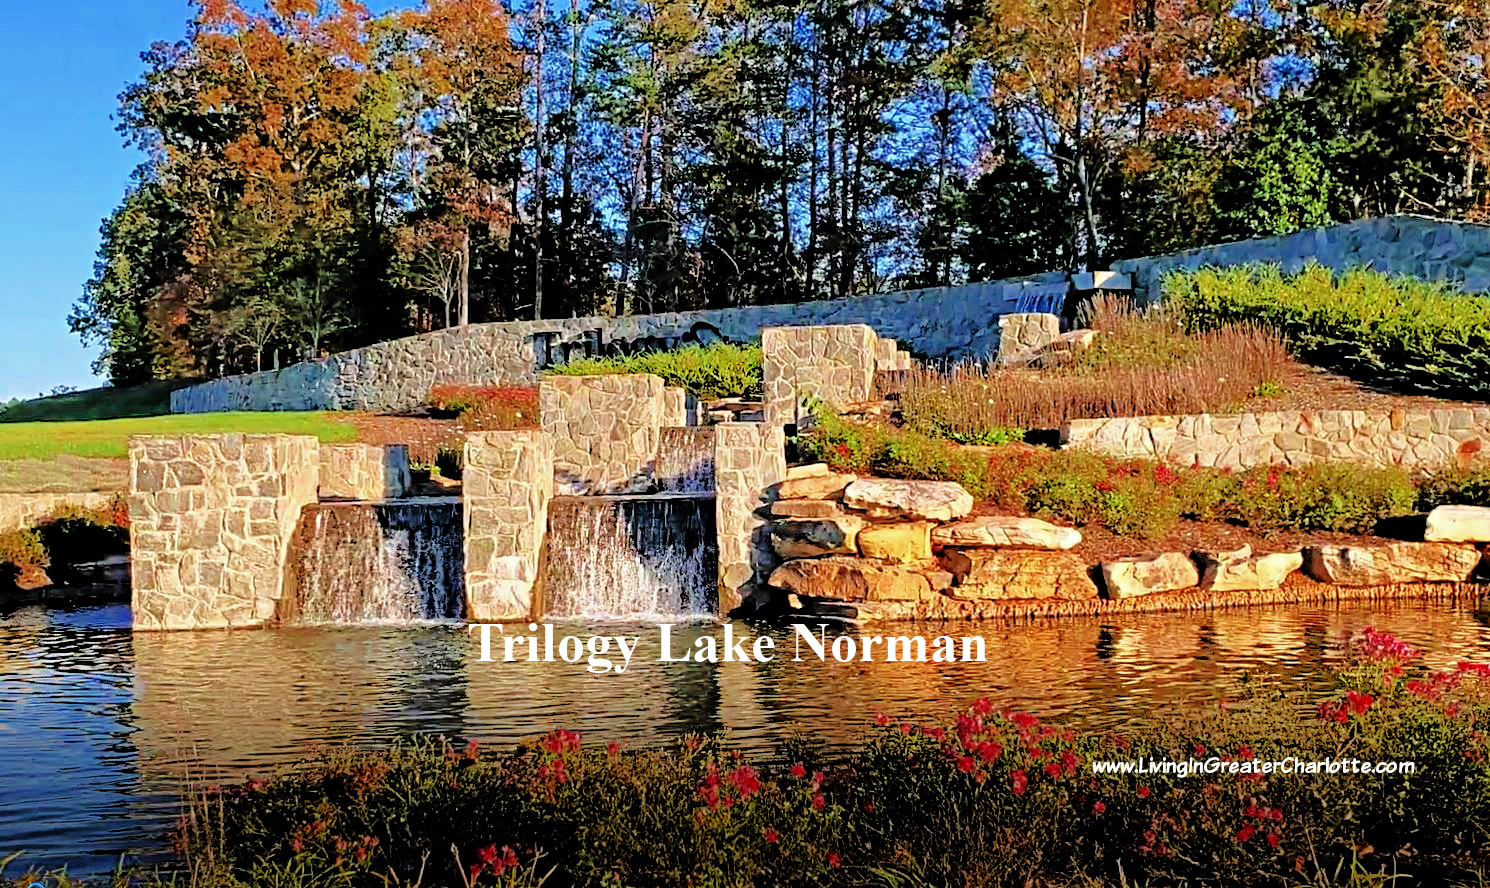 Check out Trilogy Lake Norman new construction and inventory homes. This is a 55+ community in Denver NC, close to Charlotte, NC.